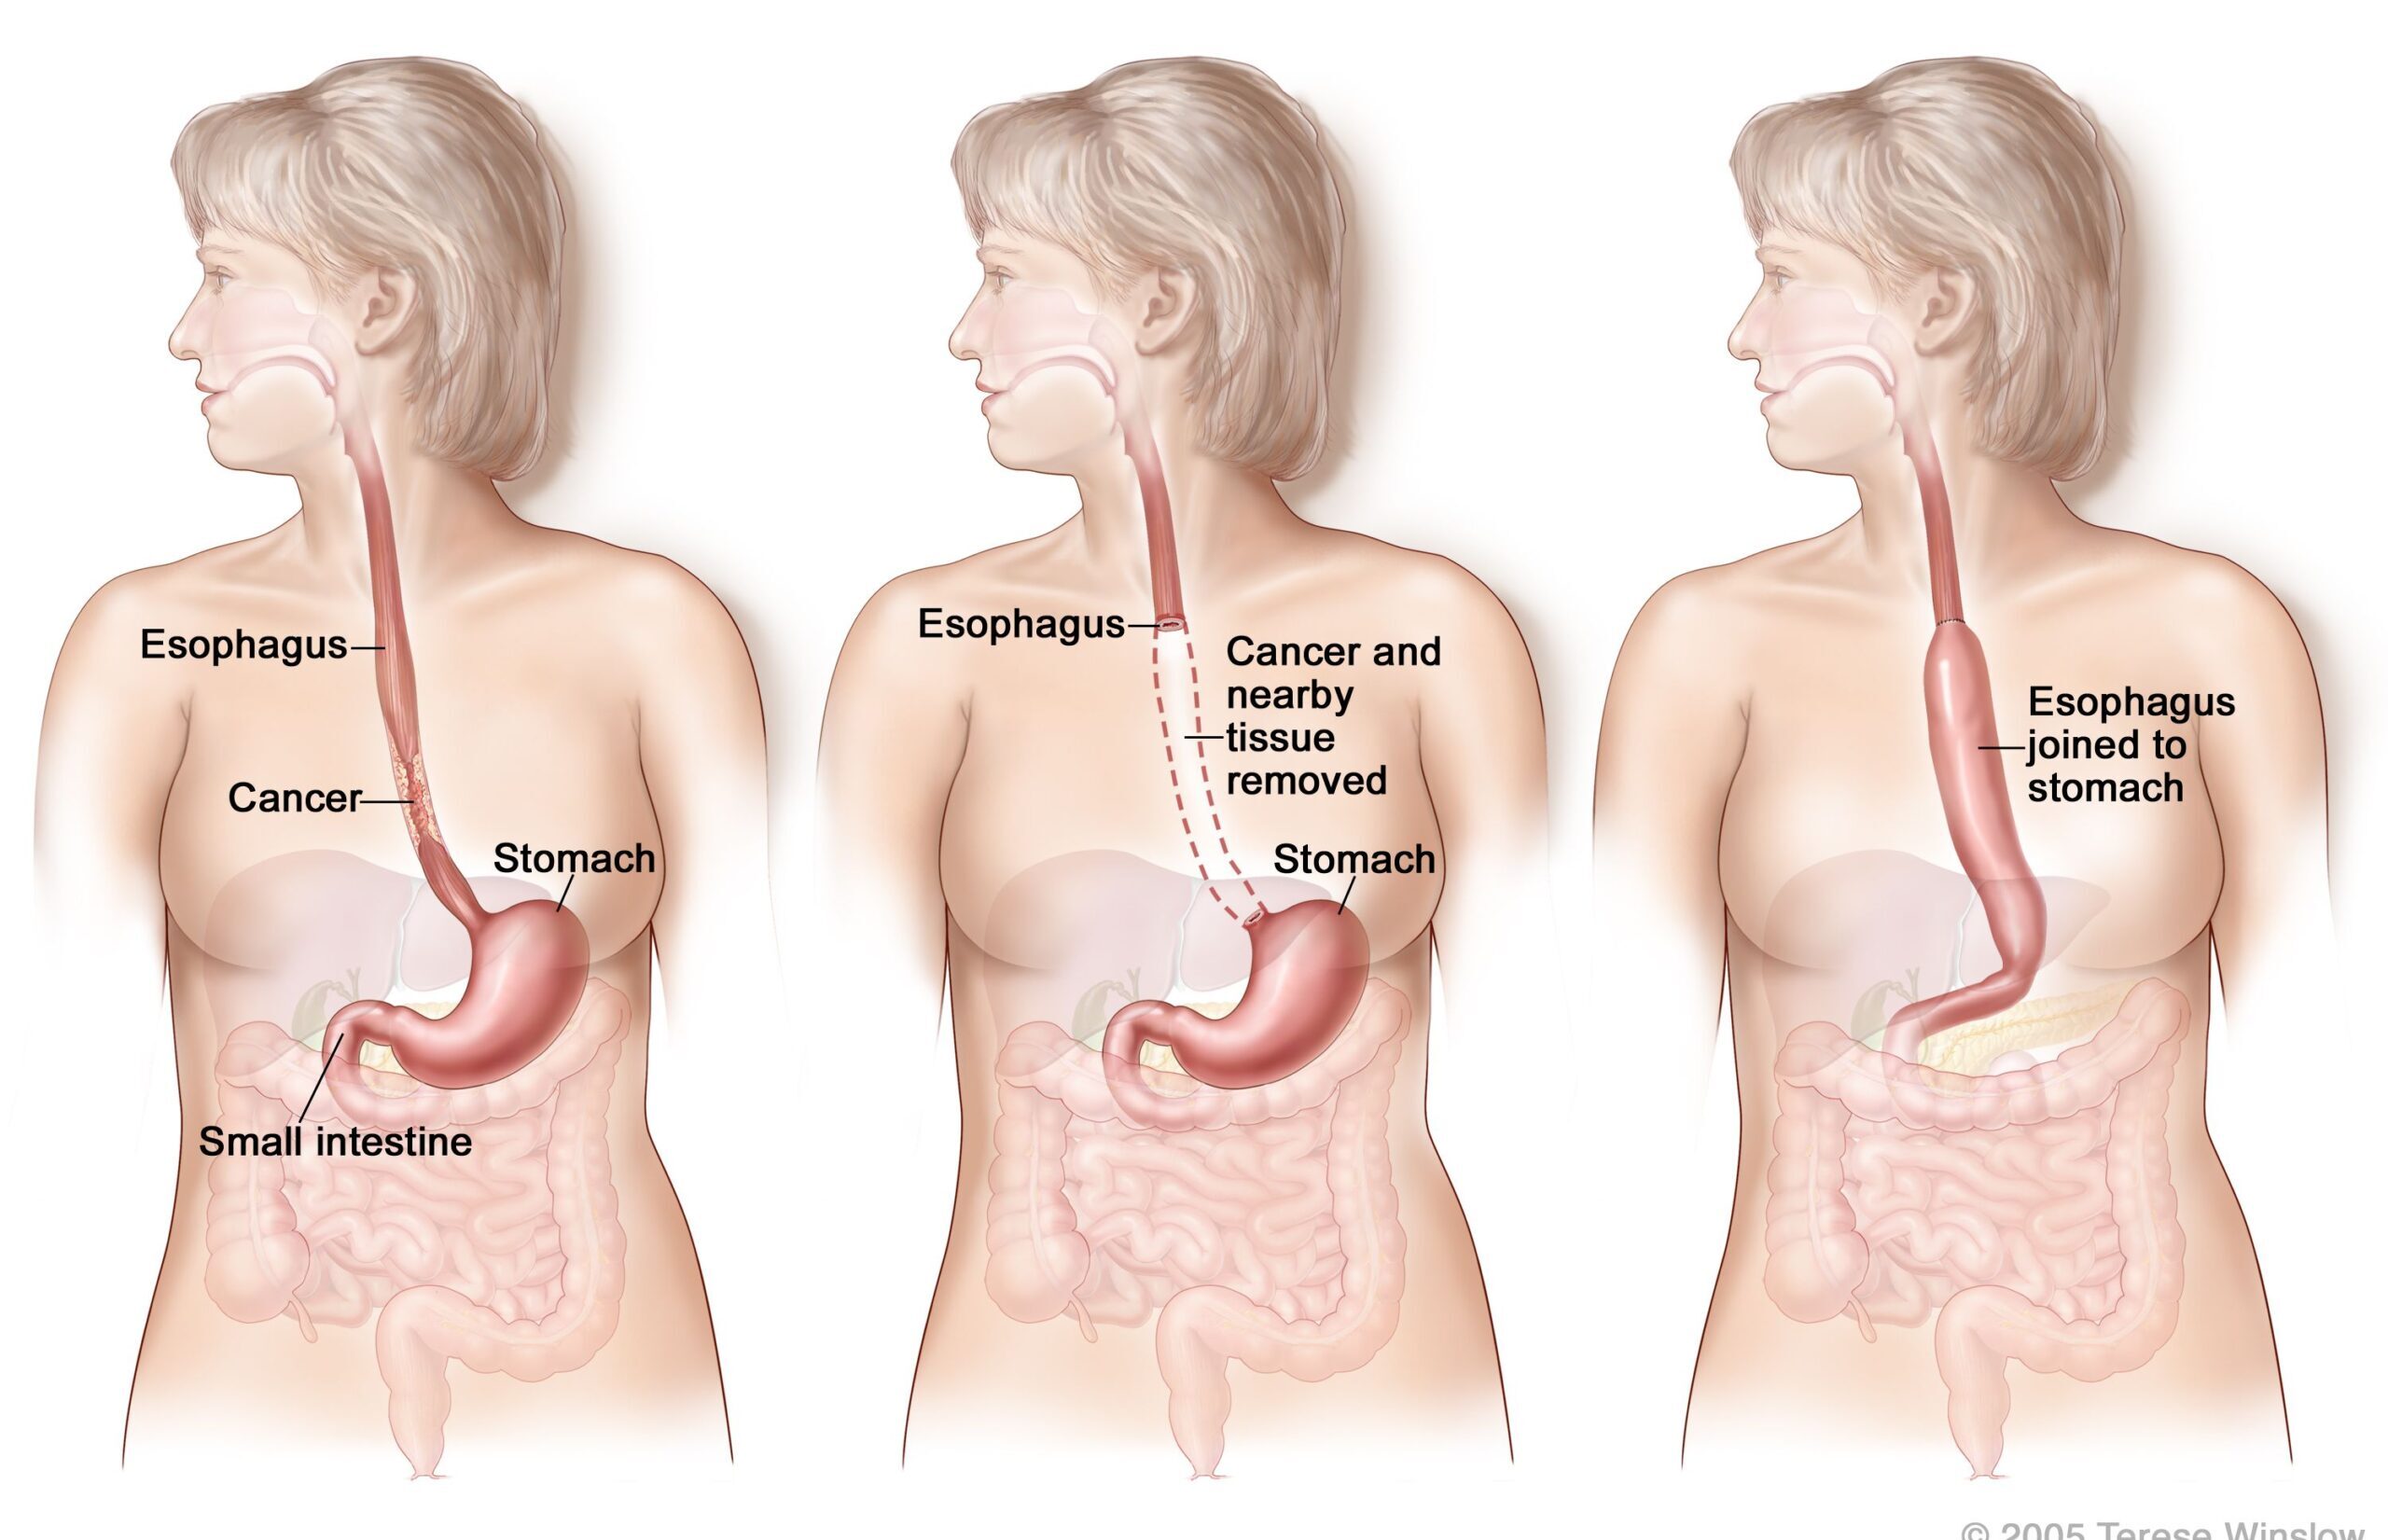 Esophageal operations